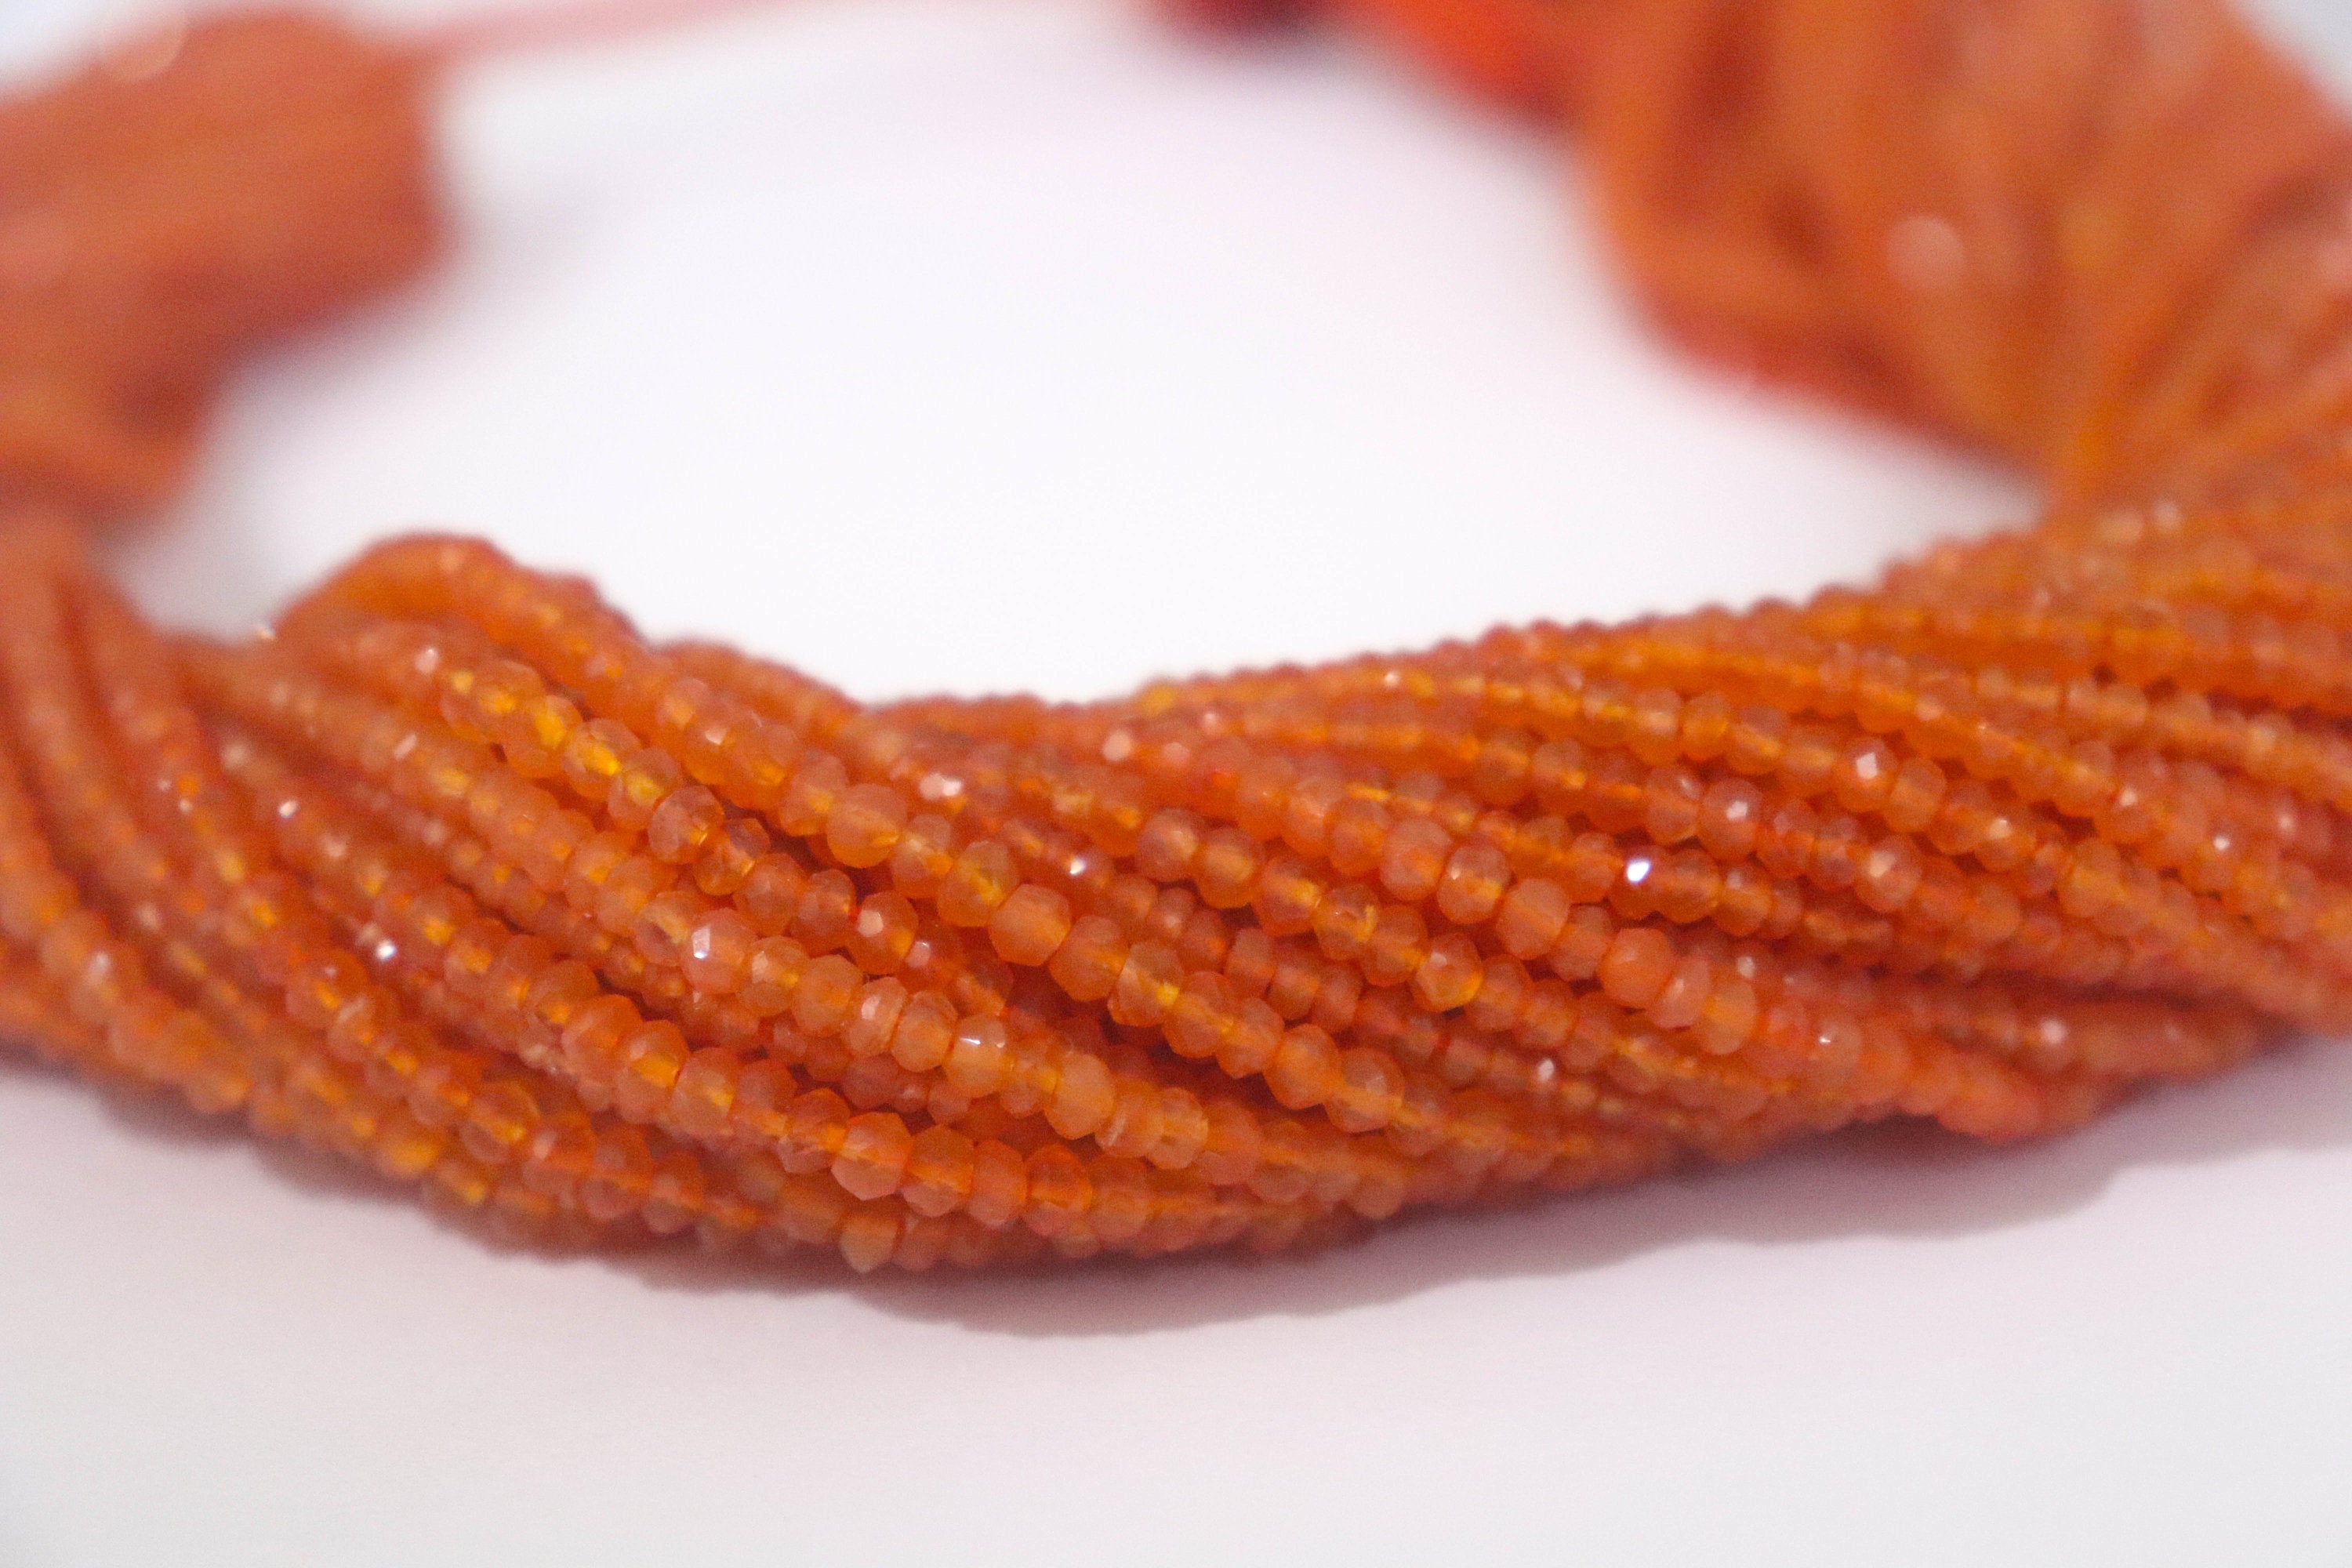 Carnelian faceted Beads 3mm Mircro faceted beads 16" , Carnelian Beads,  Carnelian Faceted Beads, Wholesale Carnelian gemstone beads - Beadsforyourjewelry